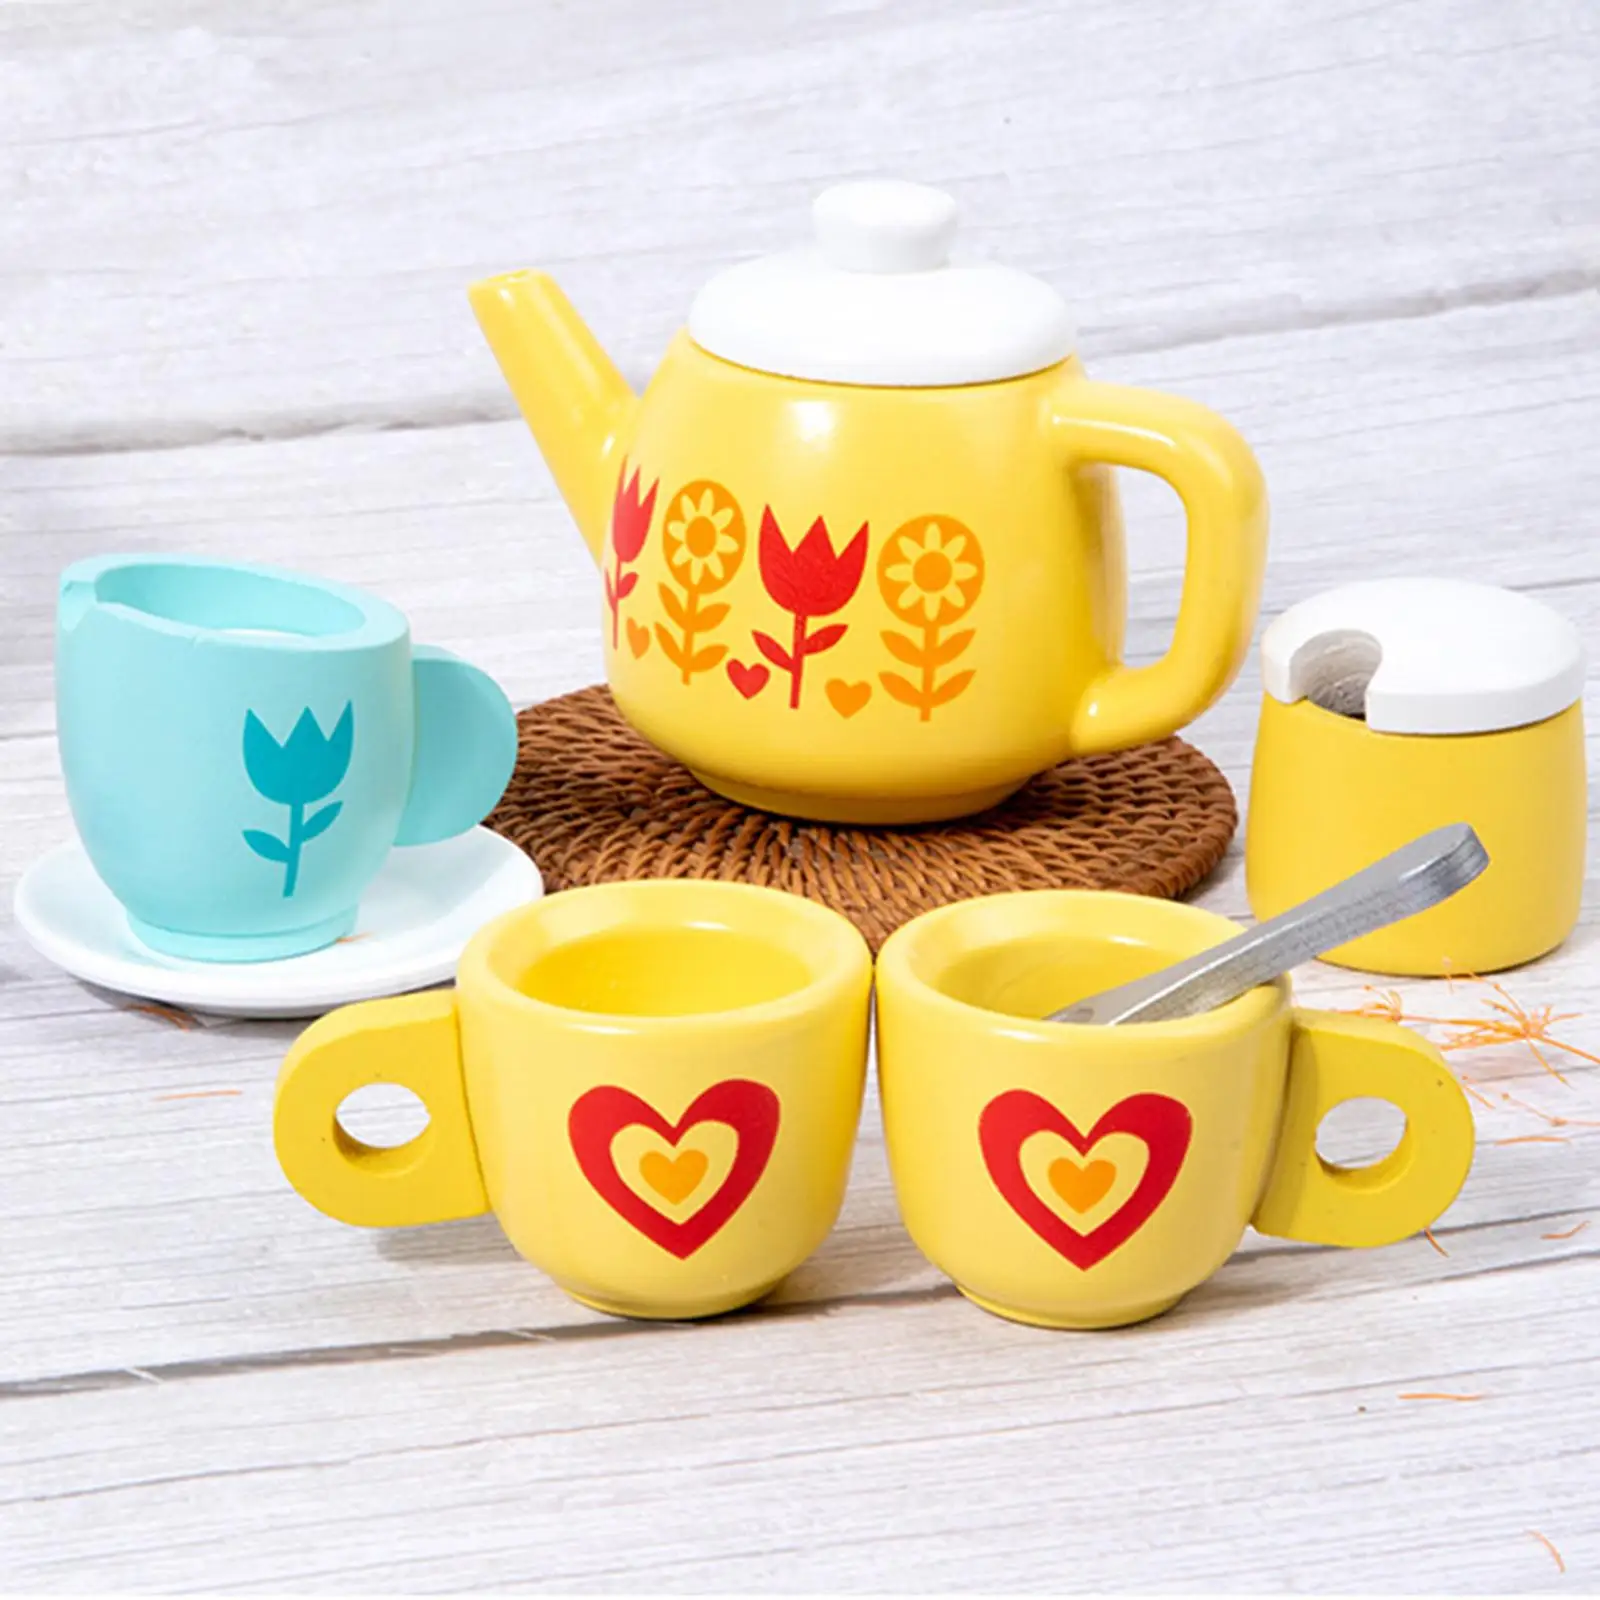 8Pcs Tea Party Role Pretend Play Wooden Toy Montessori Toy for Kids Tea Party Tea Set Birthday Party Gift Play Toy 3 Years up